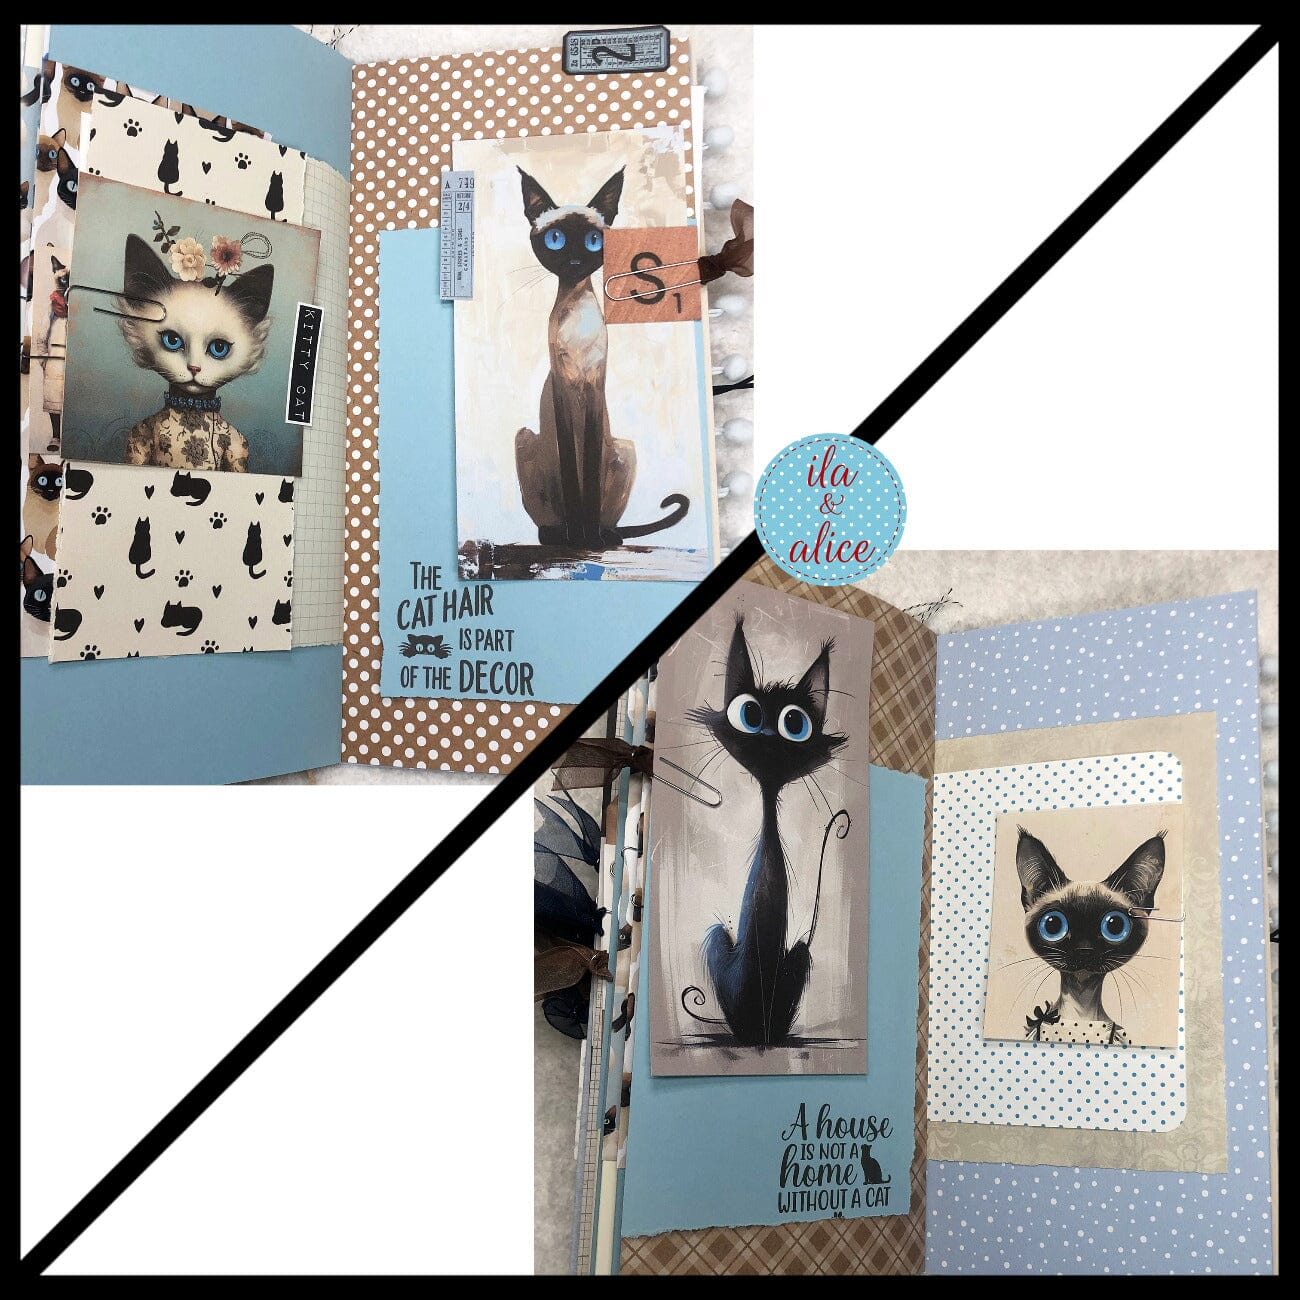 Siamese Cat Junk Journal- Soft Cover with Big Wide Eyes Journal ila & alice 